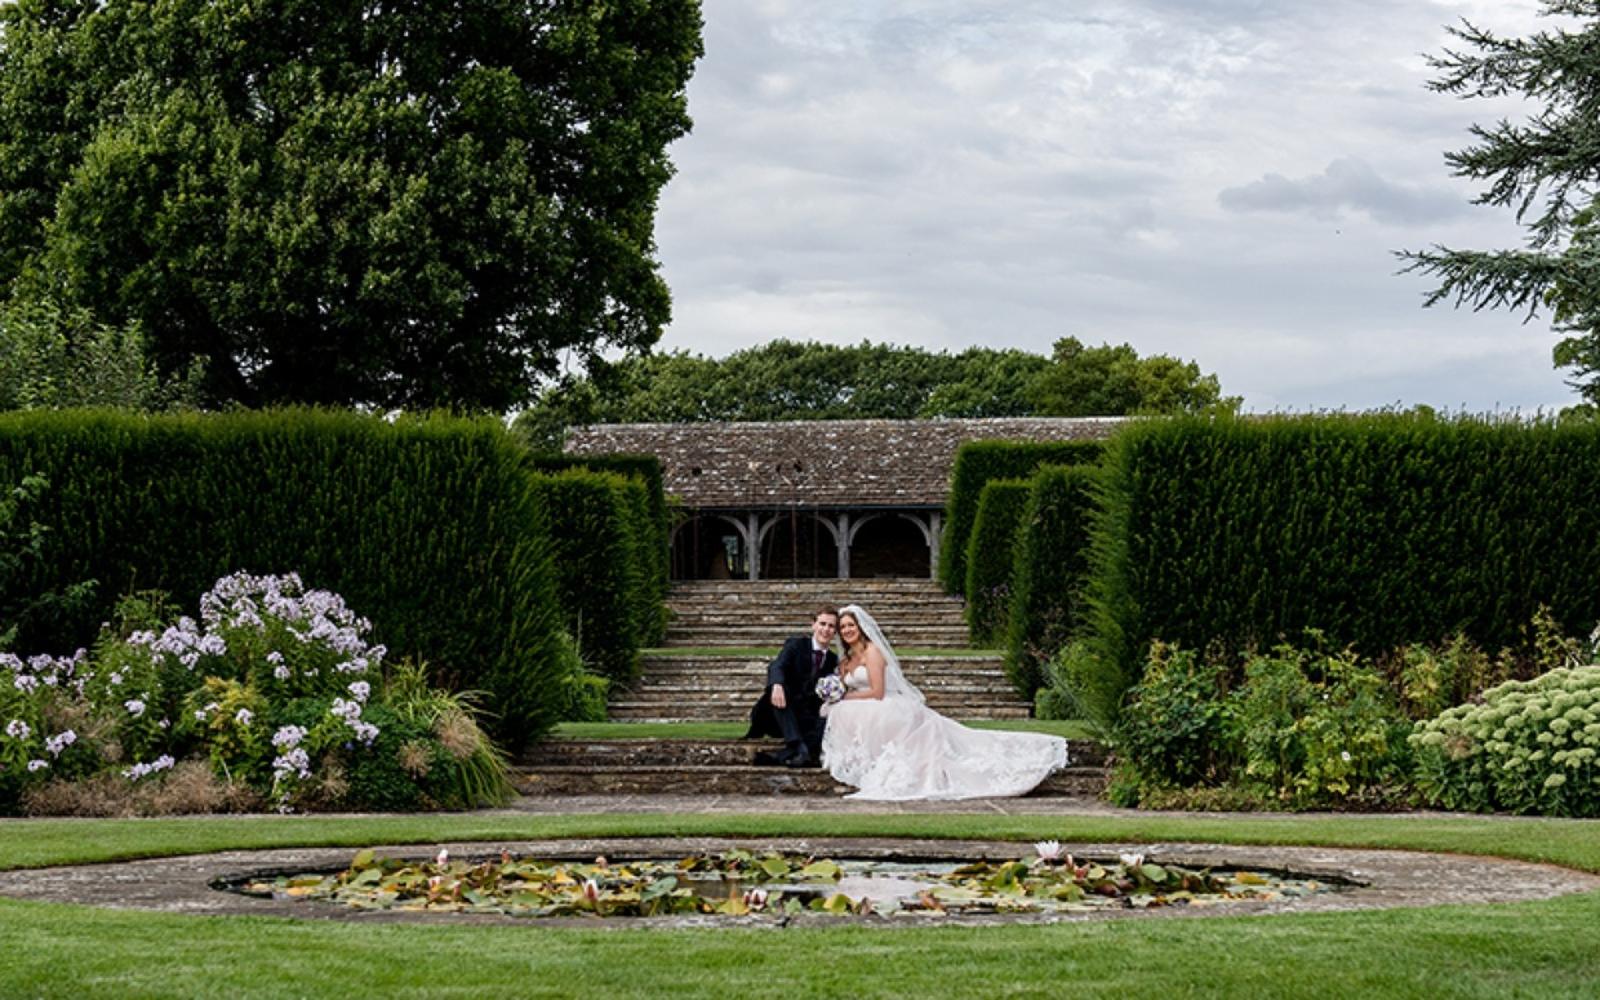 Real Wedding from Whitewed Directory approved wedding photographer duo of Cirencester Capture Every Moment intimate wedding at Whatley Manor Wiltshire gardens